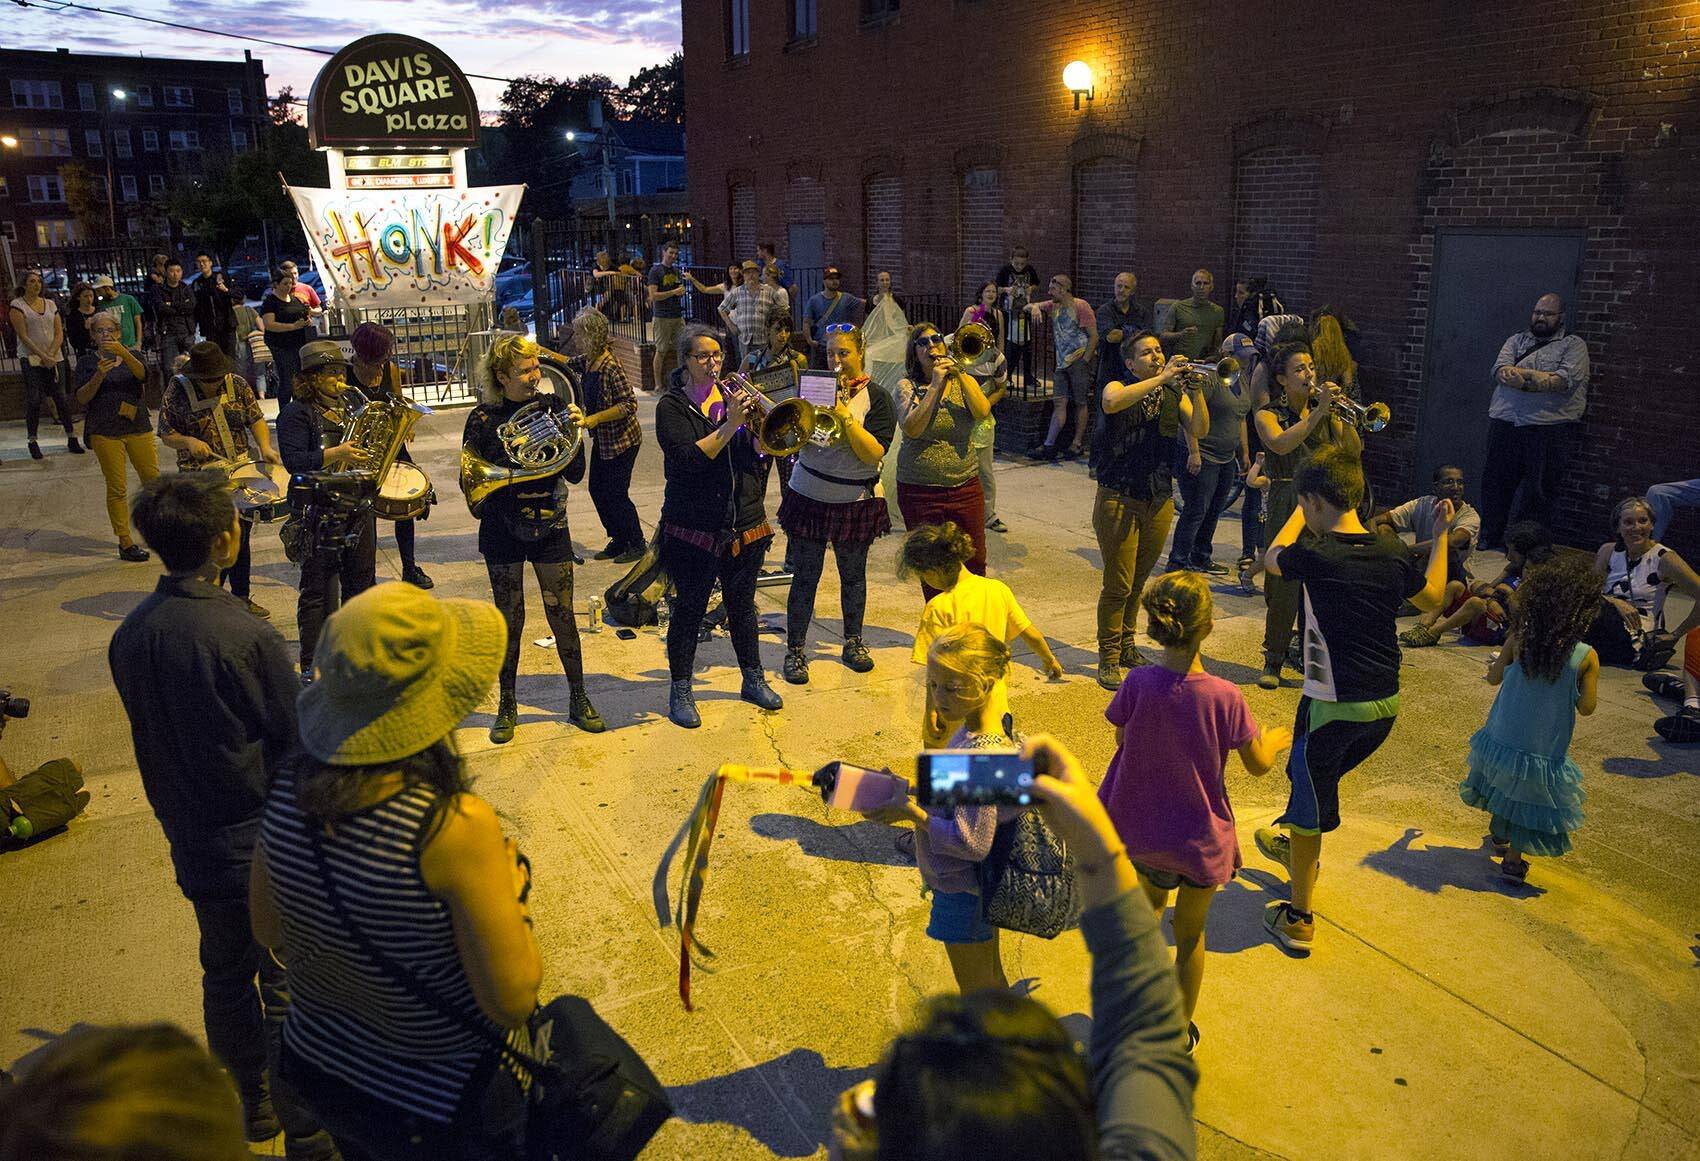 The Yes Ma'am Brass Band plays during Honk in 2017 in Somerville. (Robin Lubbock/WBUR)